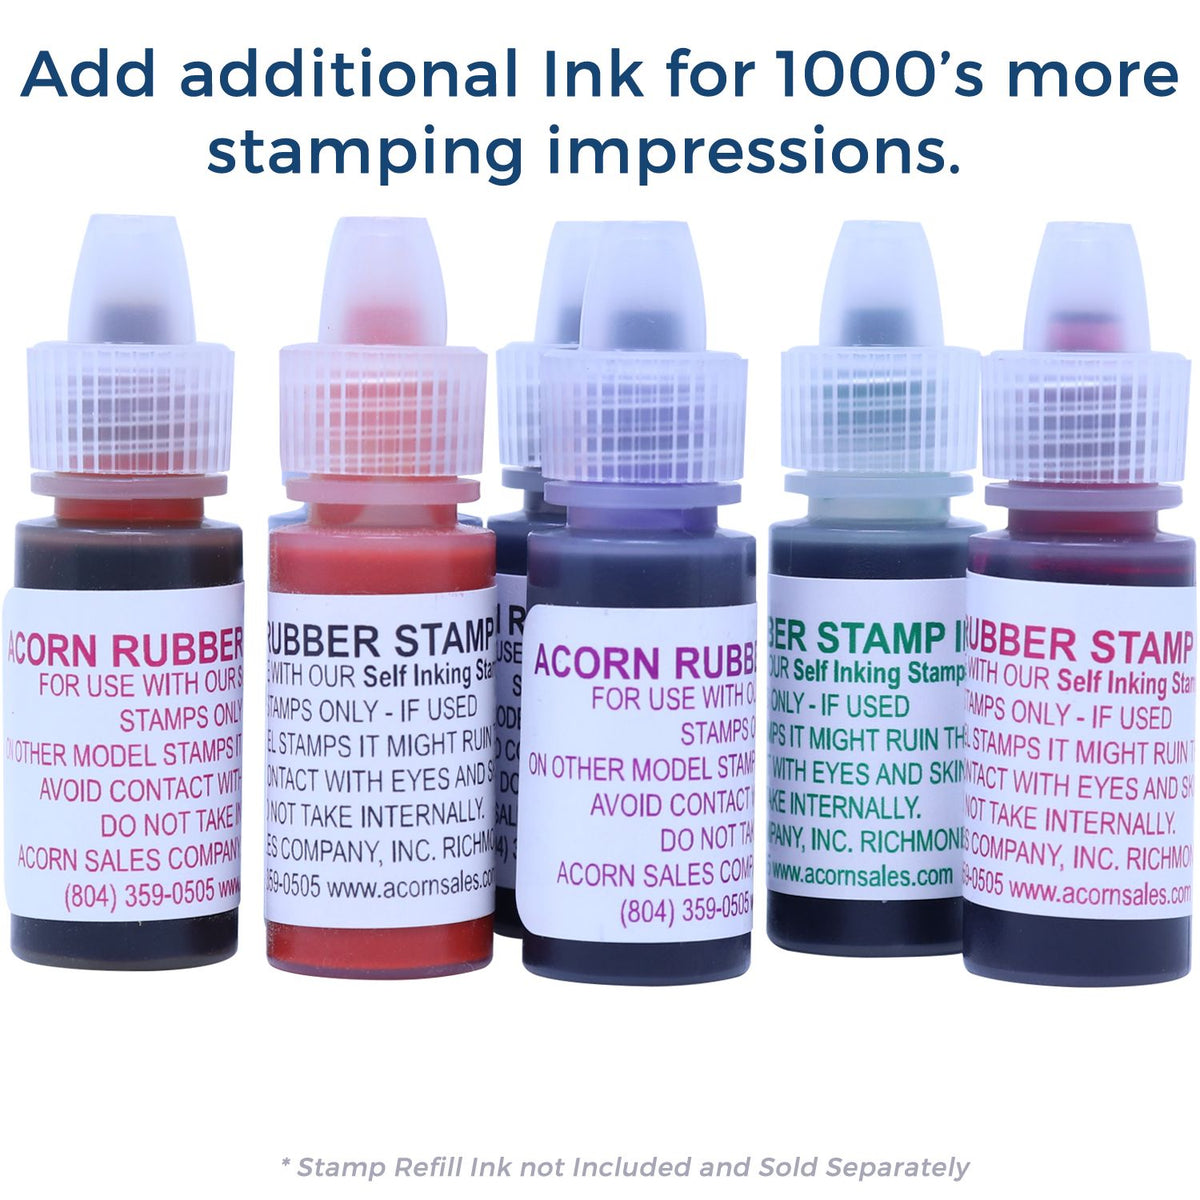 Refill Ink for Self-Inking Round Please Correct Smiley Stamp Available